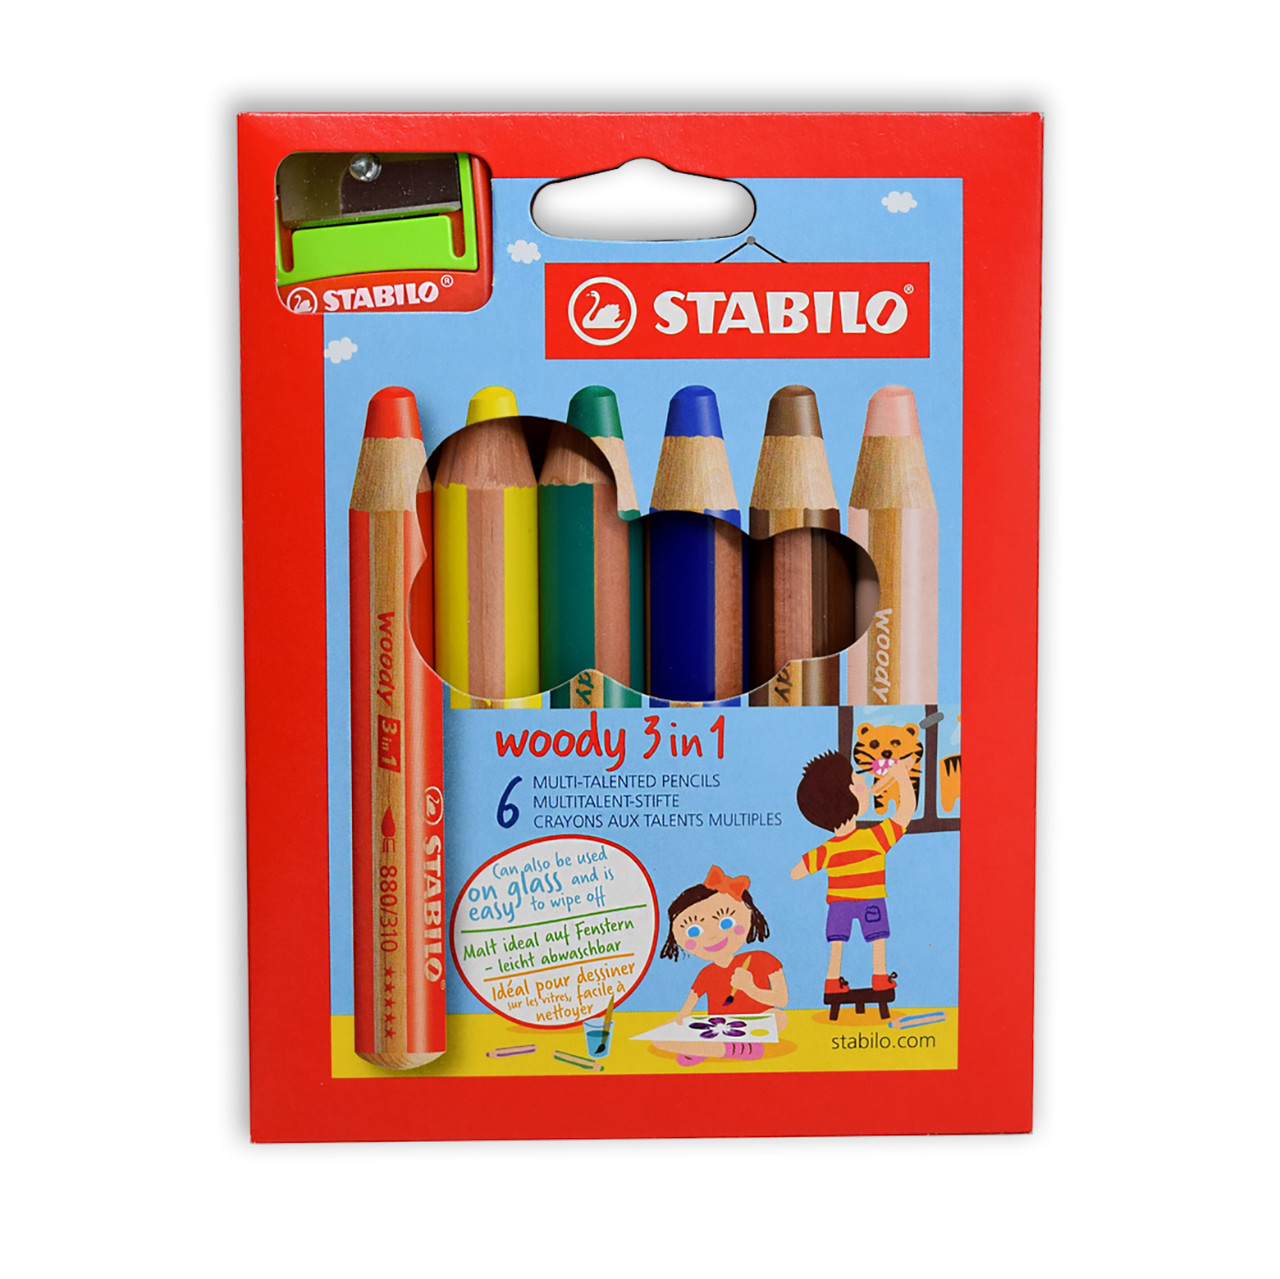 STABILO Woody 3 in 1 - Crayon de couleur pointe large - or